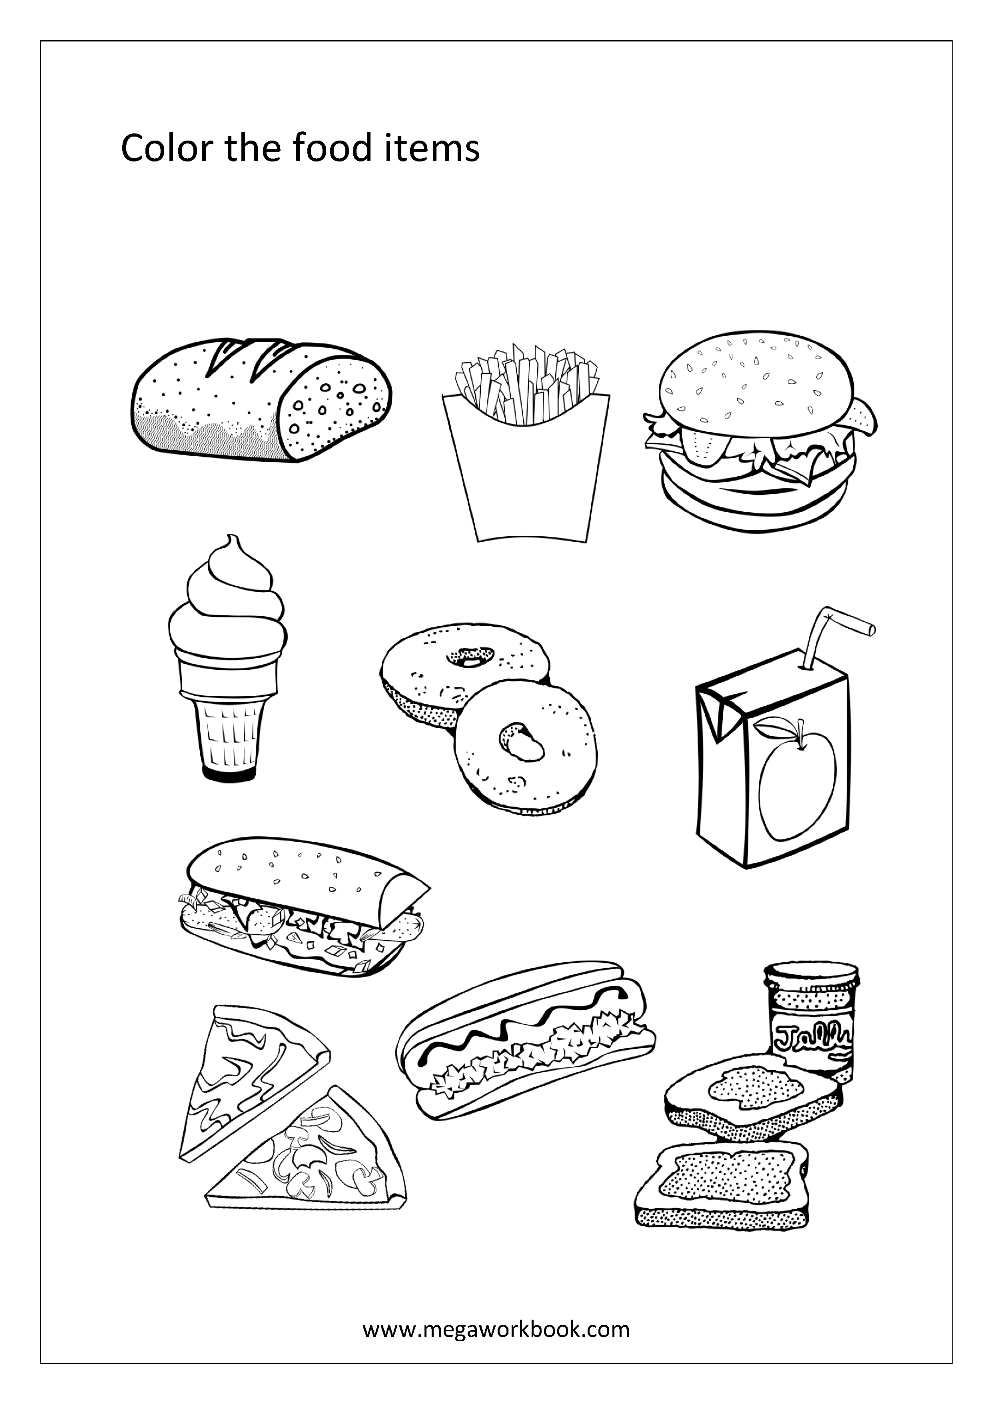 Preschool Vegetable Coloring Pages / Fruit And Vegetable Coloring Pages ...